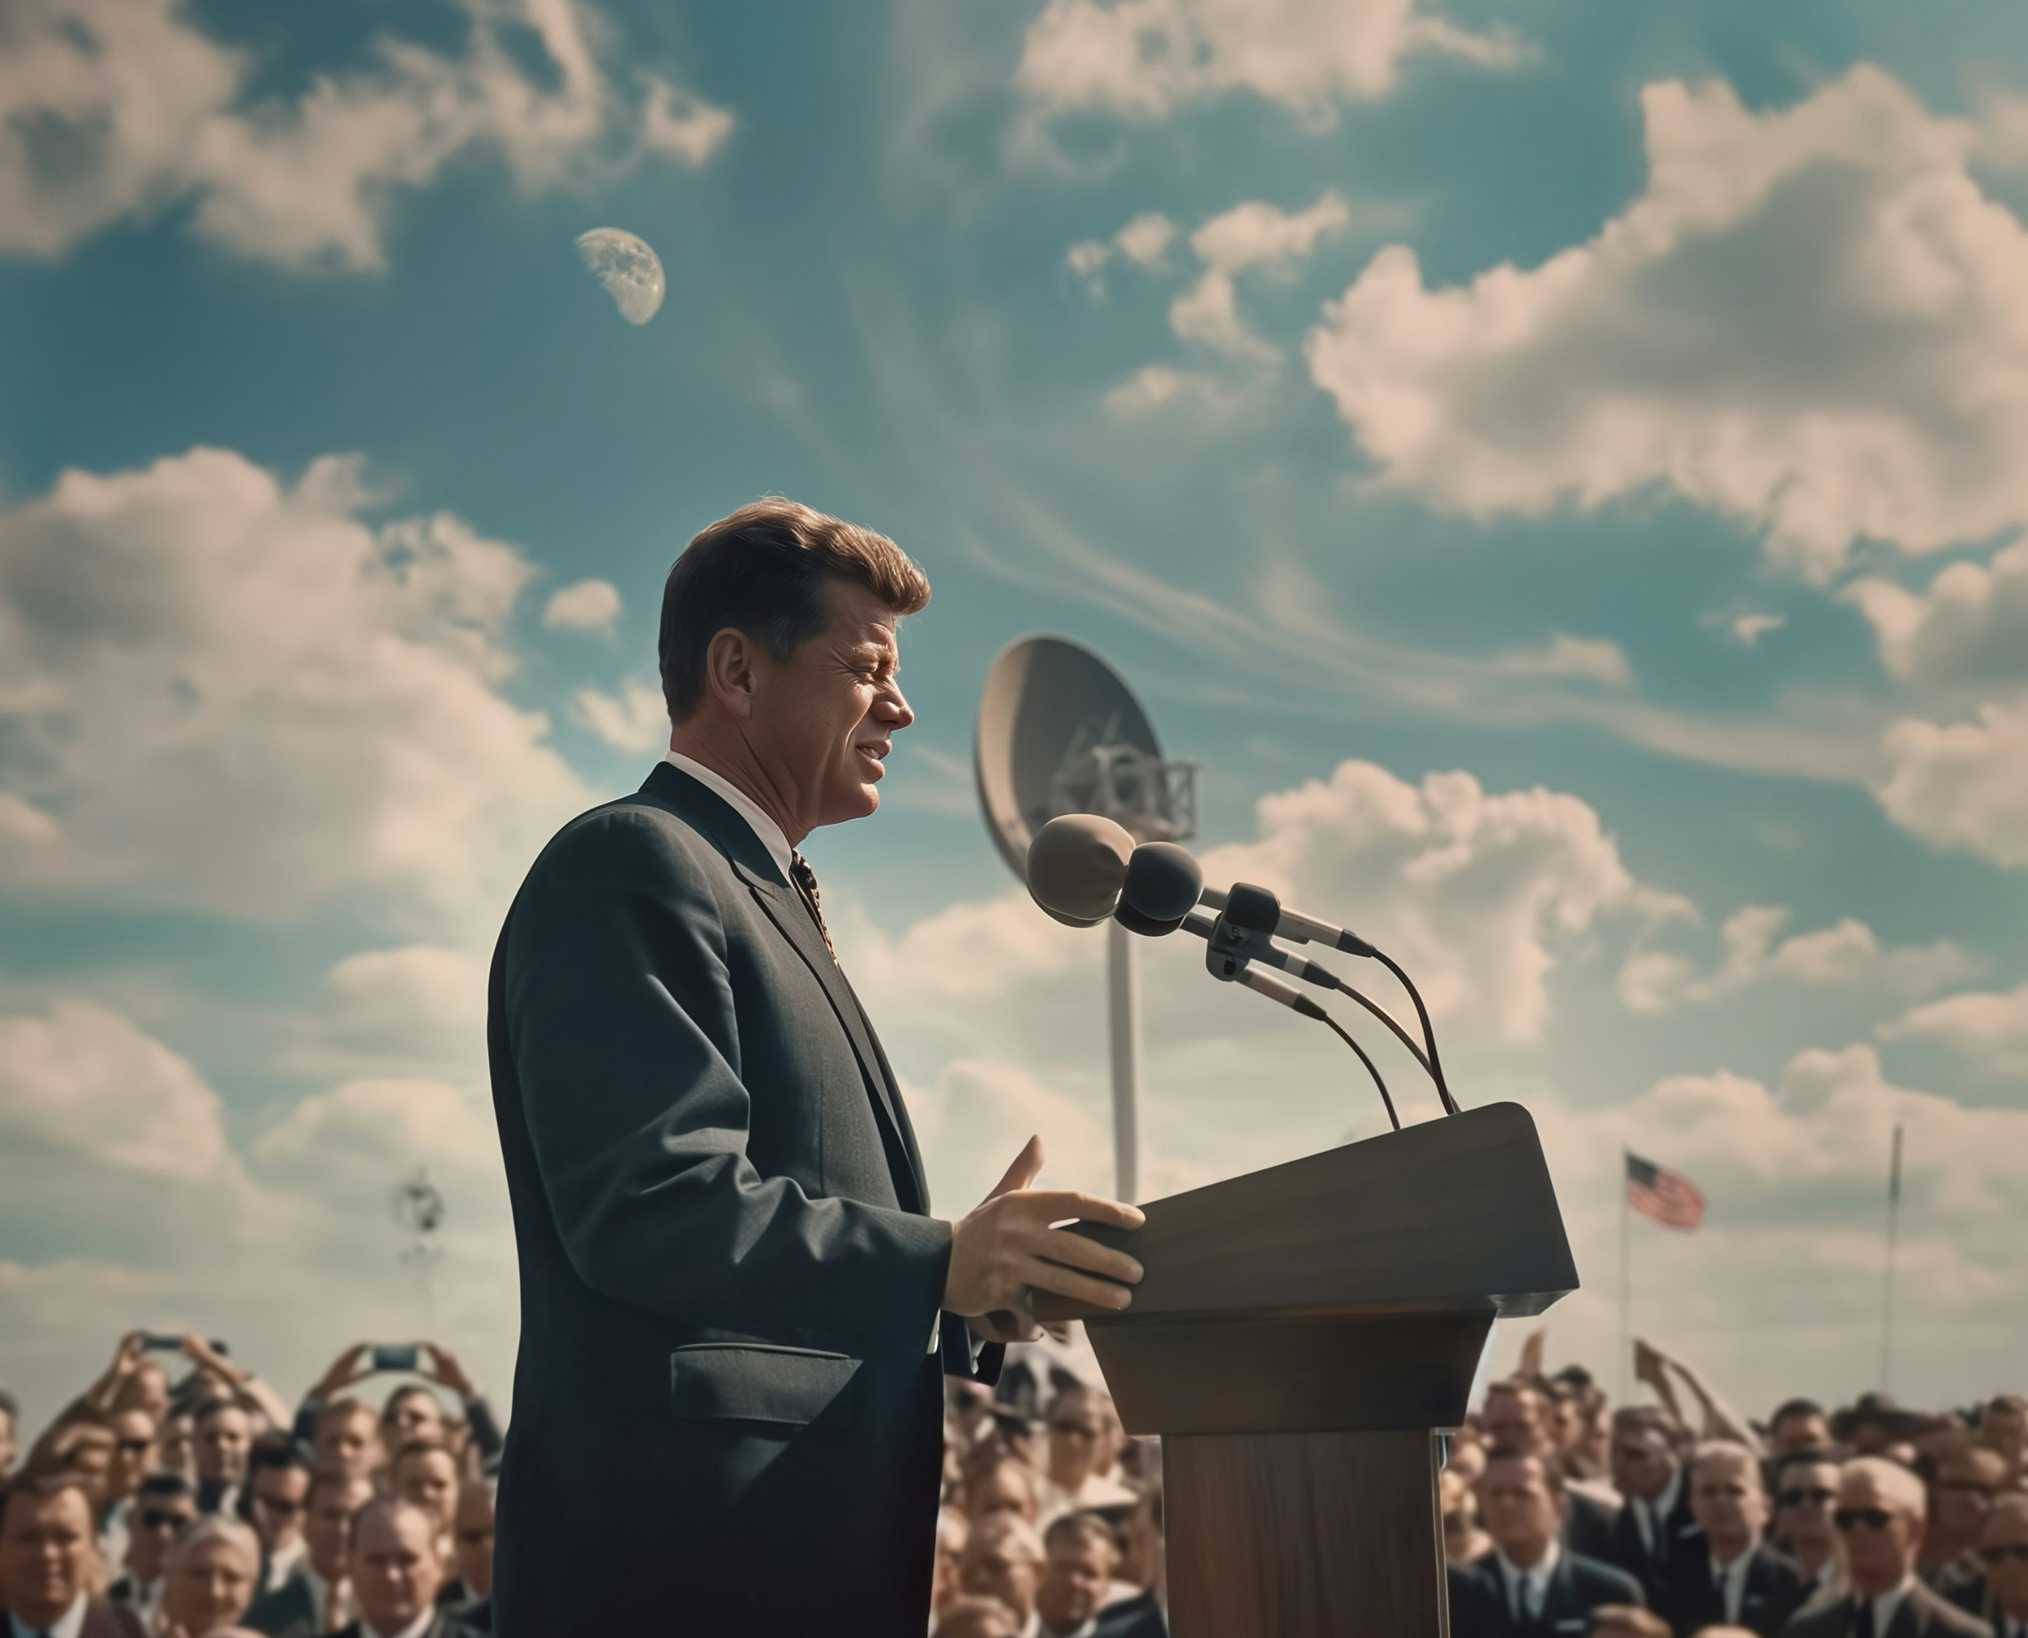 JFK talks about the aspiration of 'going to the moon'